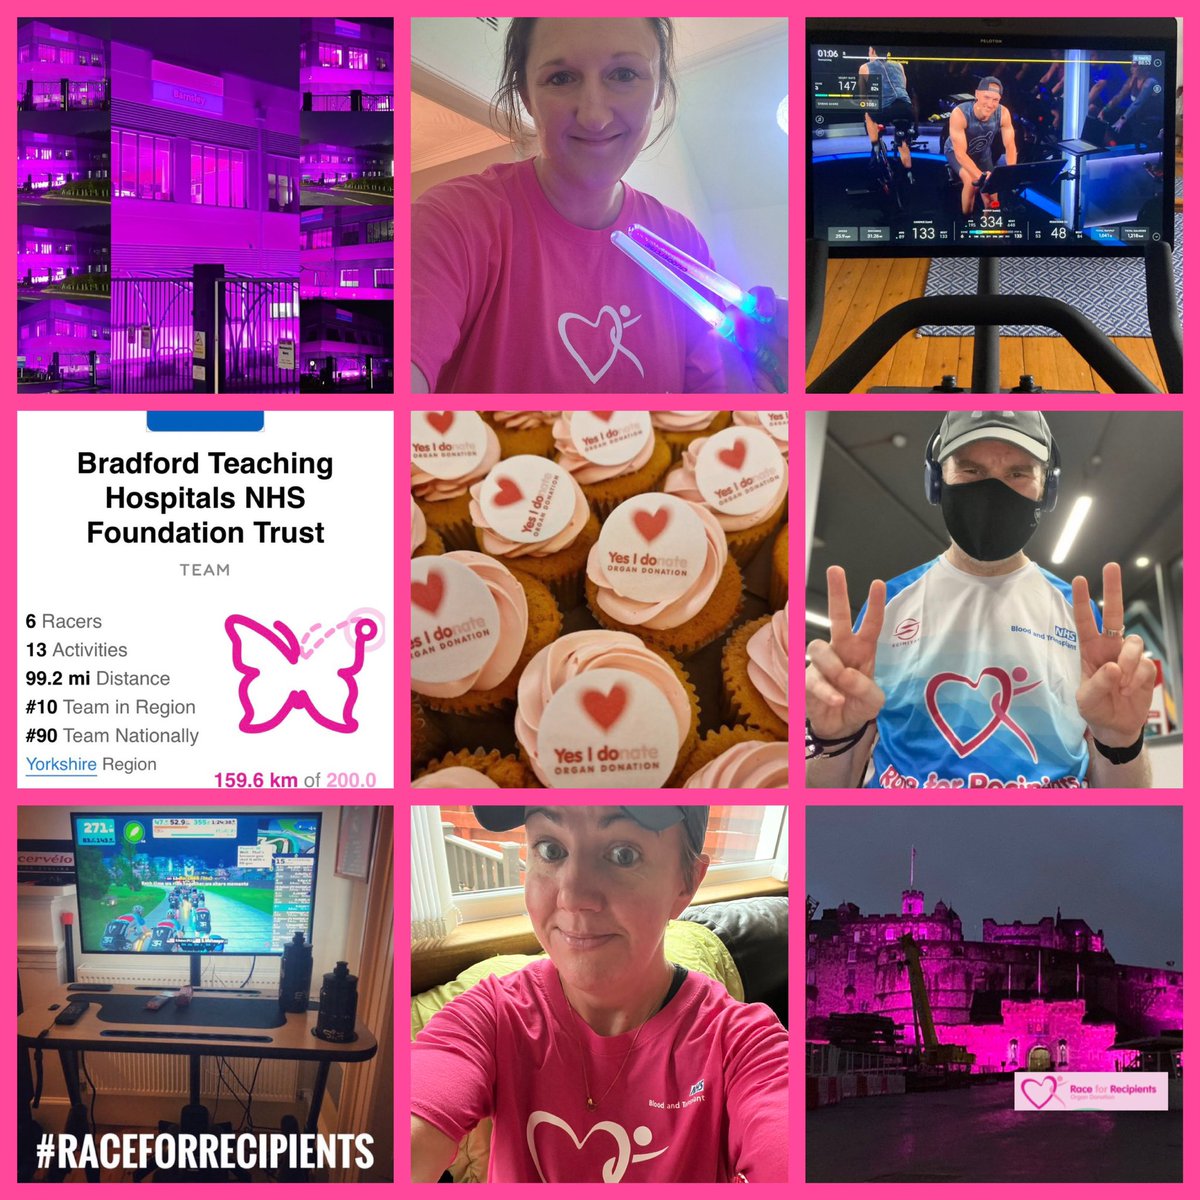 #RaceforRecipients Your day 5 round up in pictures!!💗 Thank you again to all the @R4R2023 racers, getting out there in all weather conditions to dedicate their distance to raising donation awareness & encouraging registered decisions tinyurl.com/R4RODR You are amazing🎉